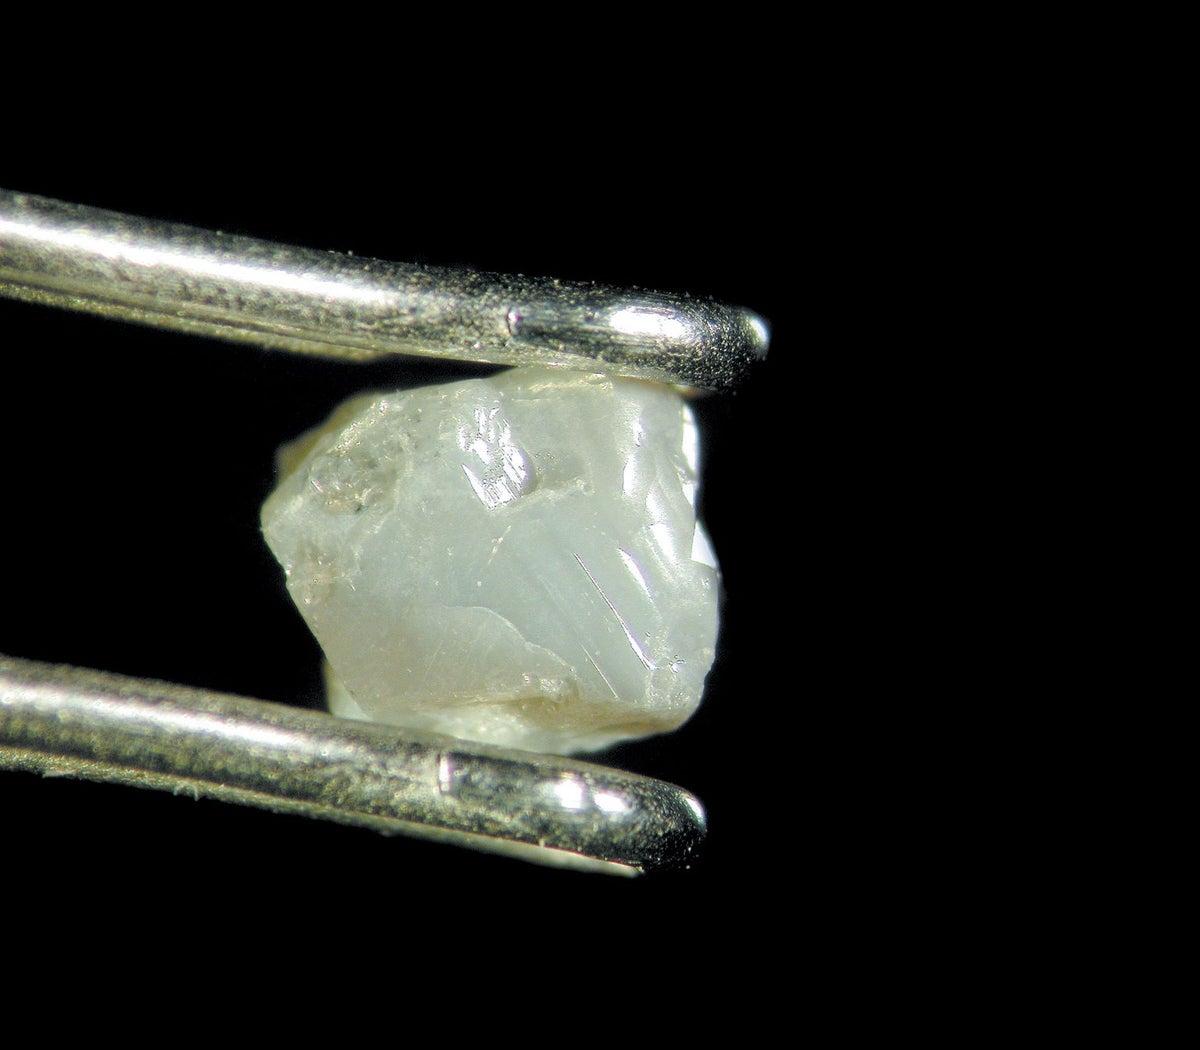 Would You Buy a Rough Diamond? - The New York Times